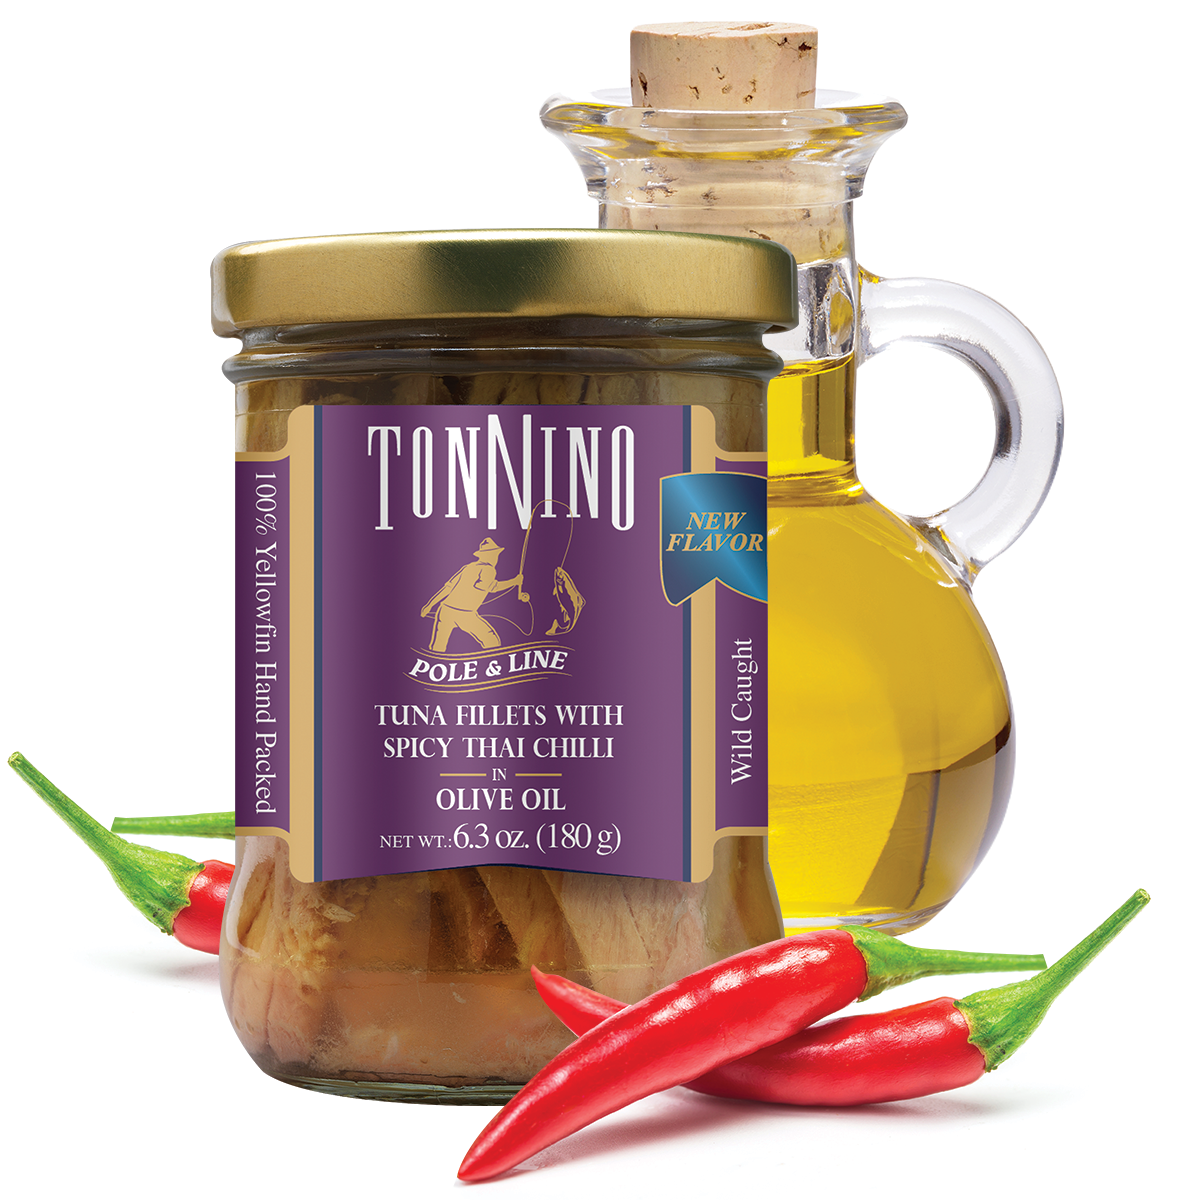 Tonnino Yellowfin Tuna Fillets With Spicy Thai Chili in Olive Oil, 6.3 oz